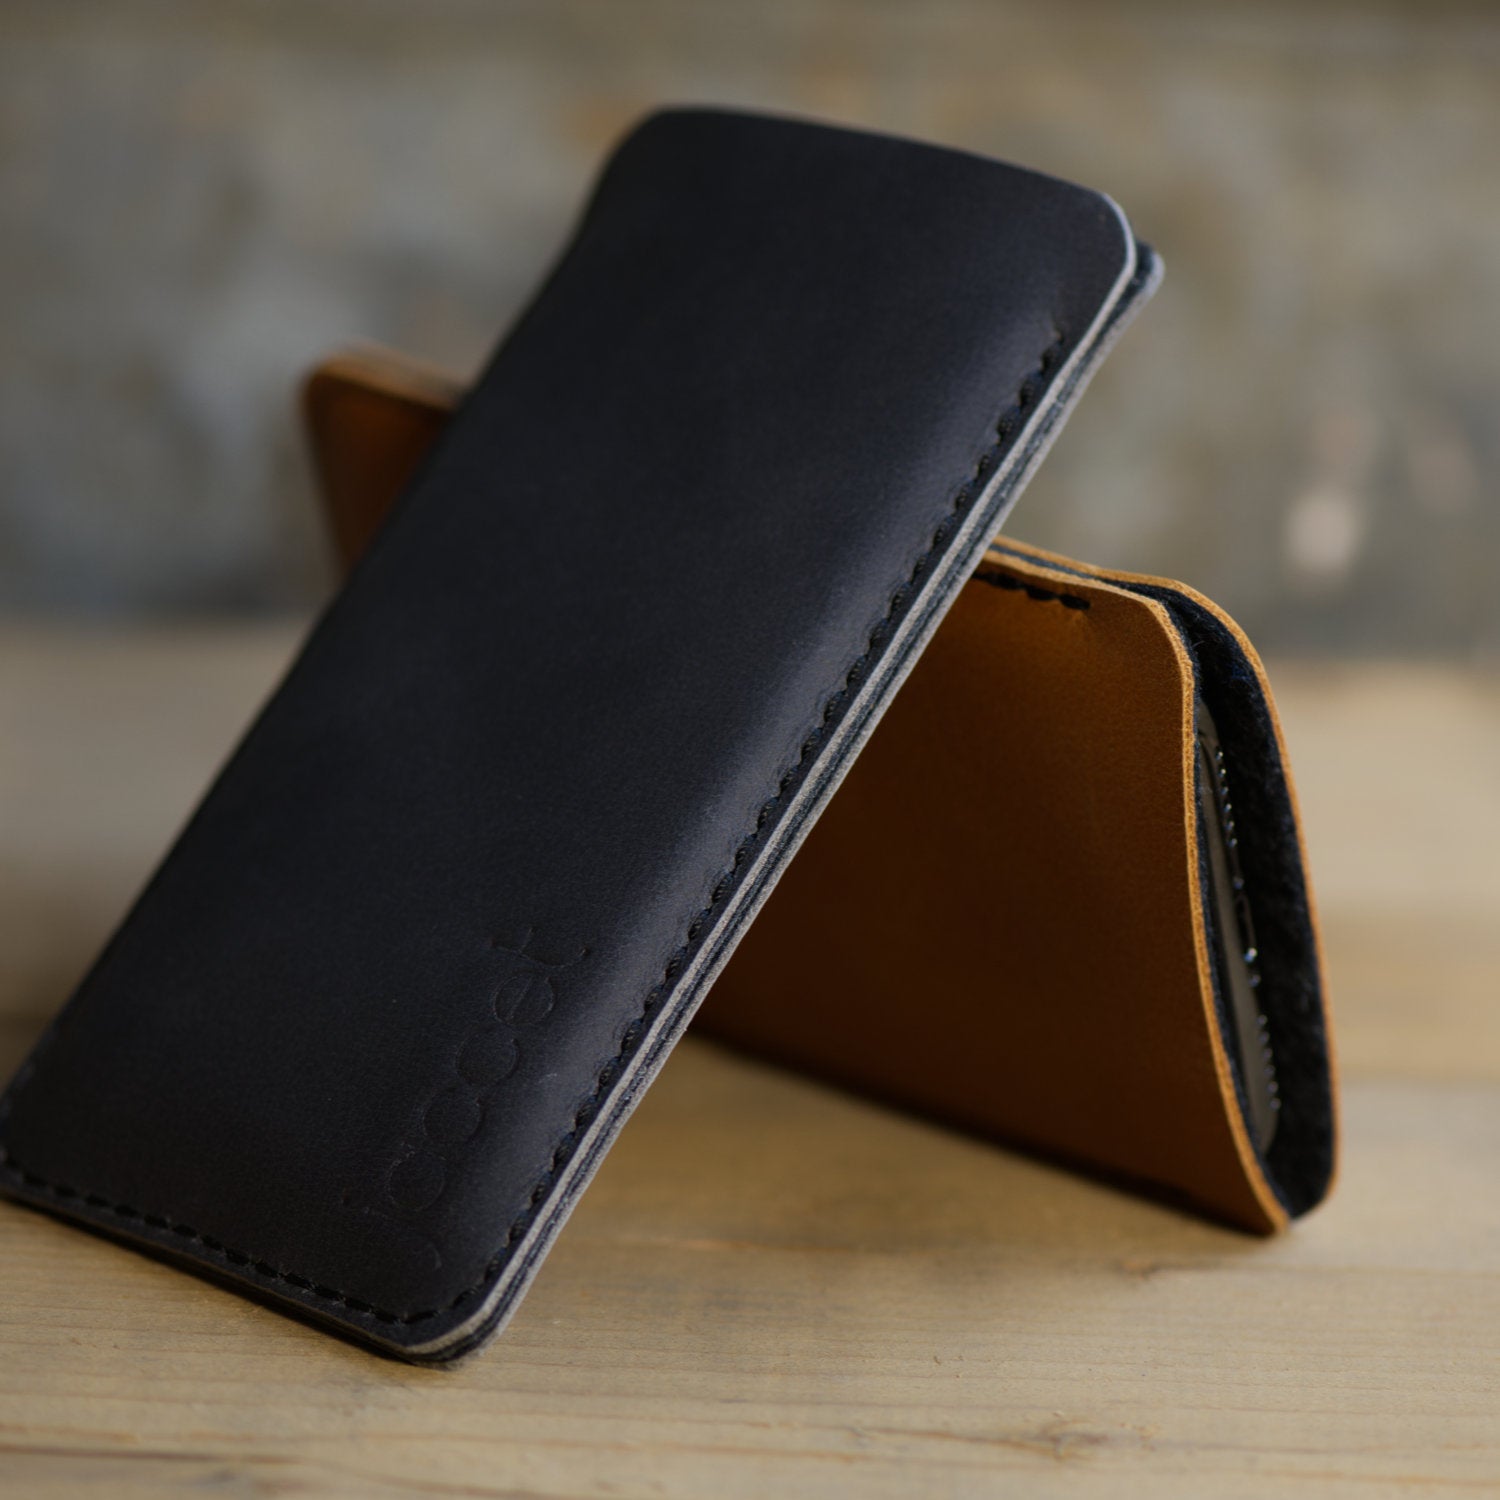 JACCET leather Xiaomi sleeve - anthracite/black leather with black wool felt. 100% Handmade